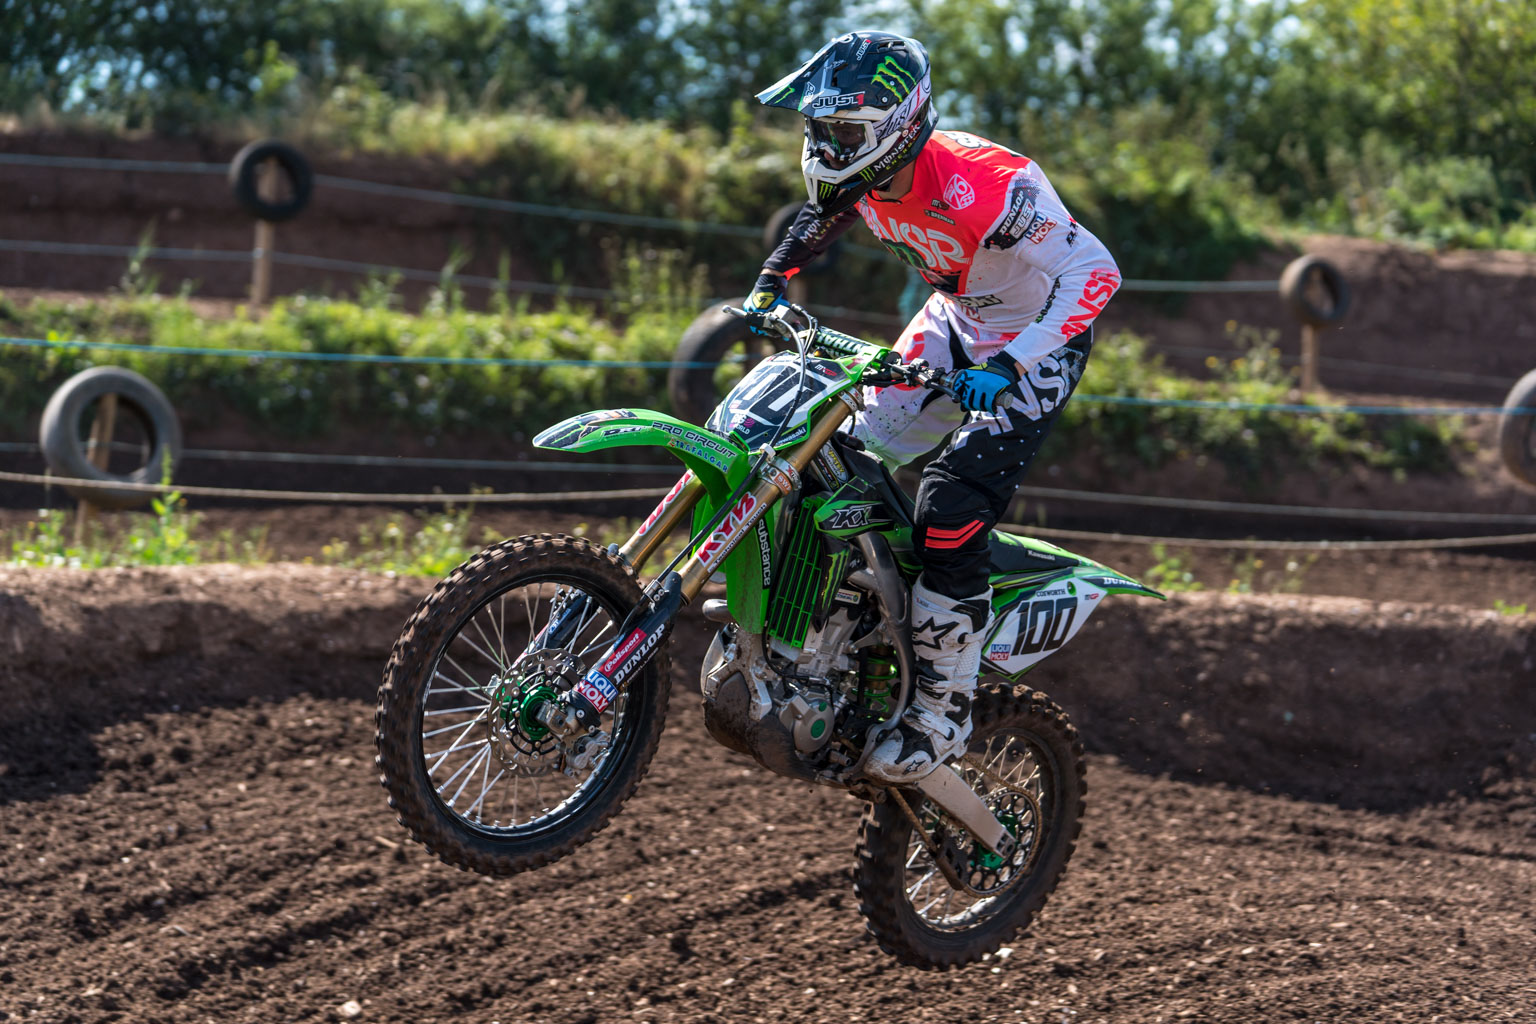 Searle reckons the bike is spot-on after he spent some time fine tuning it before his hand injury